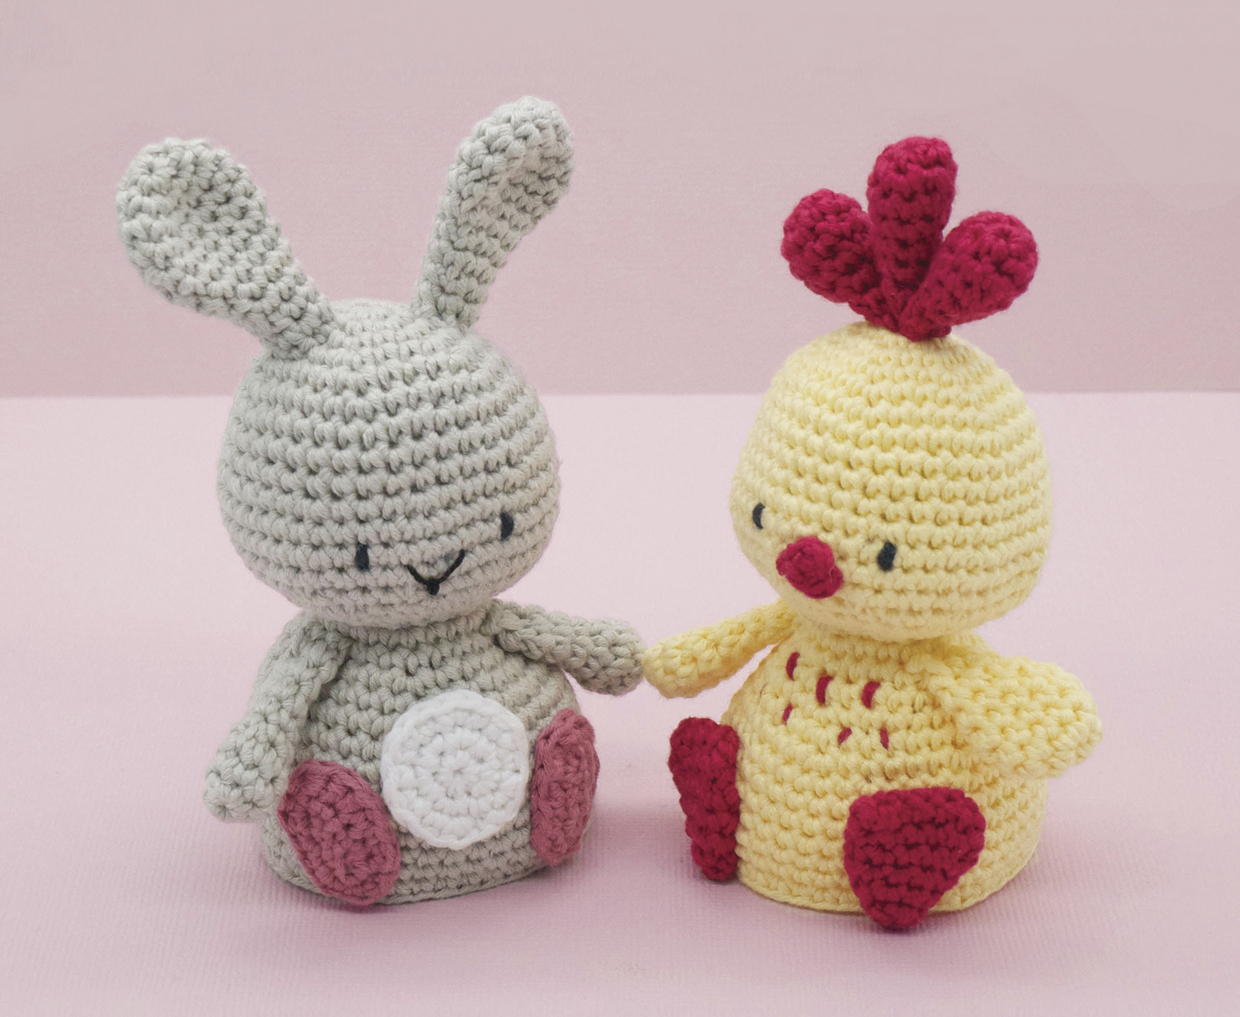 Simply Crochet egg cosy pattern collection